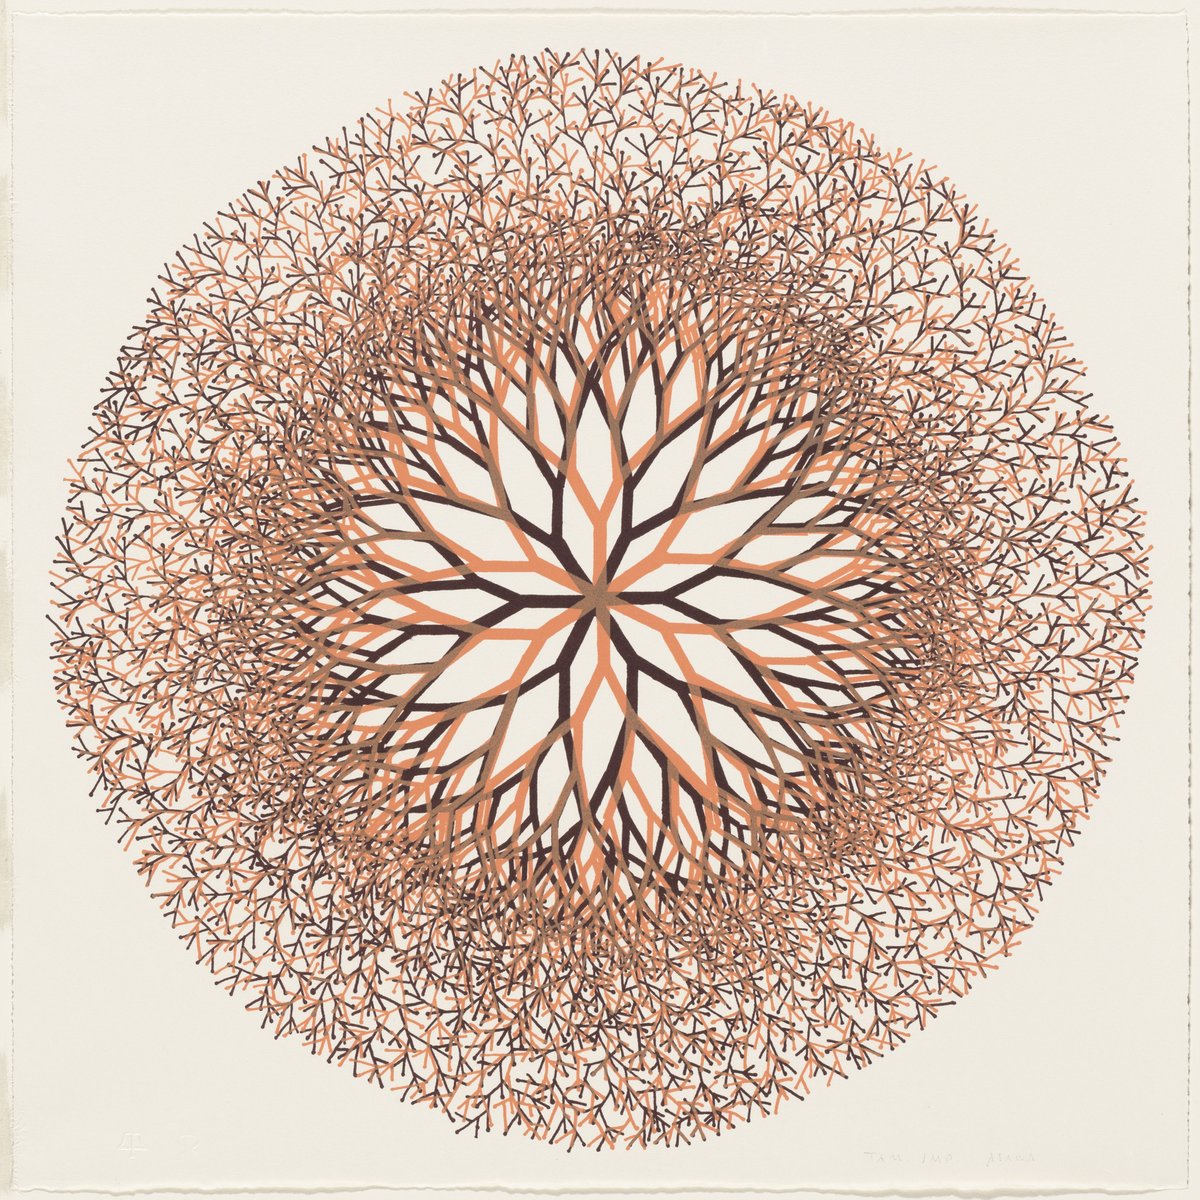 'Ruth Aiko Asawa (January 24, 1926 – August 5, 2013) was an American modernist sculptor. Her work is featured in collections at the Solomon R. Guggenheim Museum and the Whitney Museum of American Art in New York City.'

#ruthasawa #sculpture #arthistory #modernism